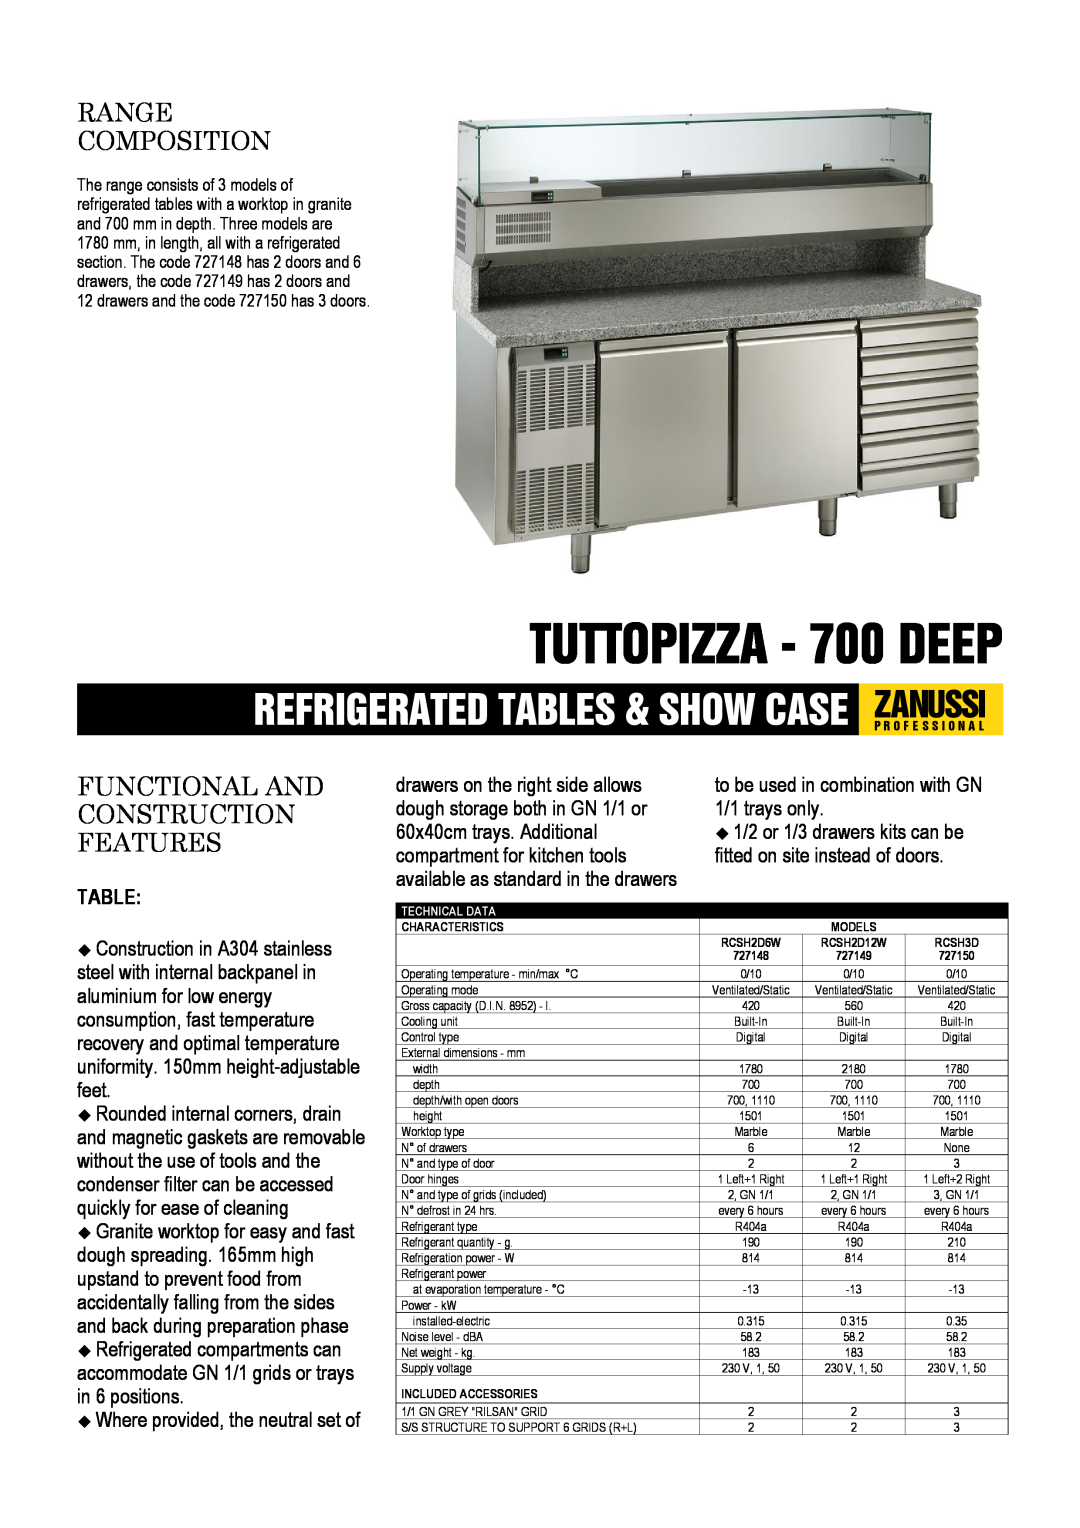 Zanussi 727148, 727150, 727149 dimensions TUTTOPIZZA - 700 DEEP, Range Composition, Functional And Construction Features 